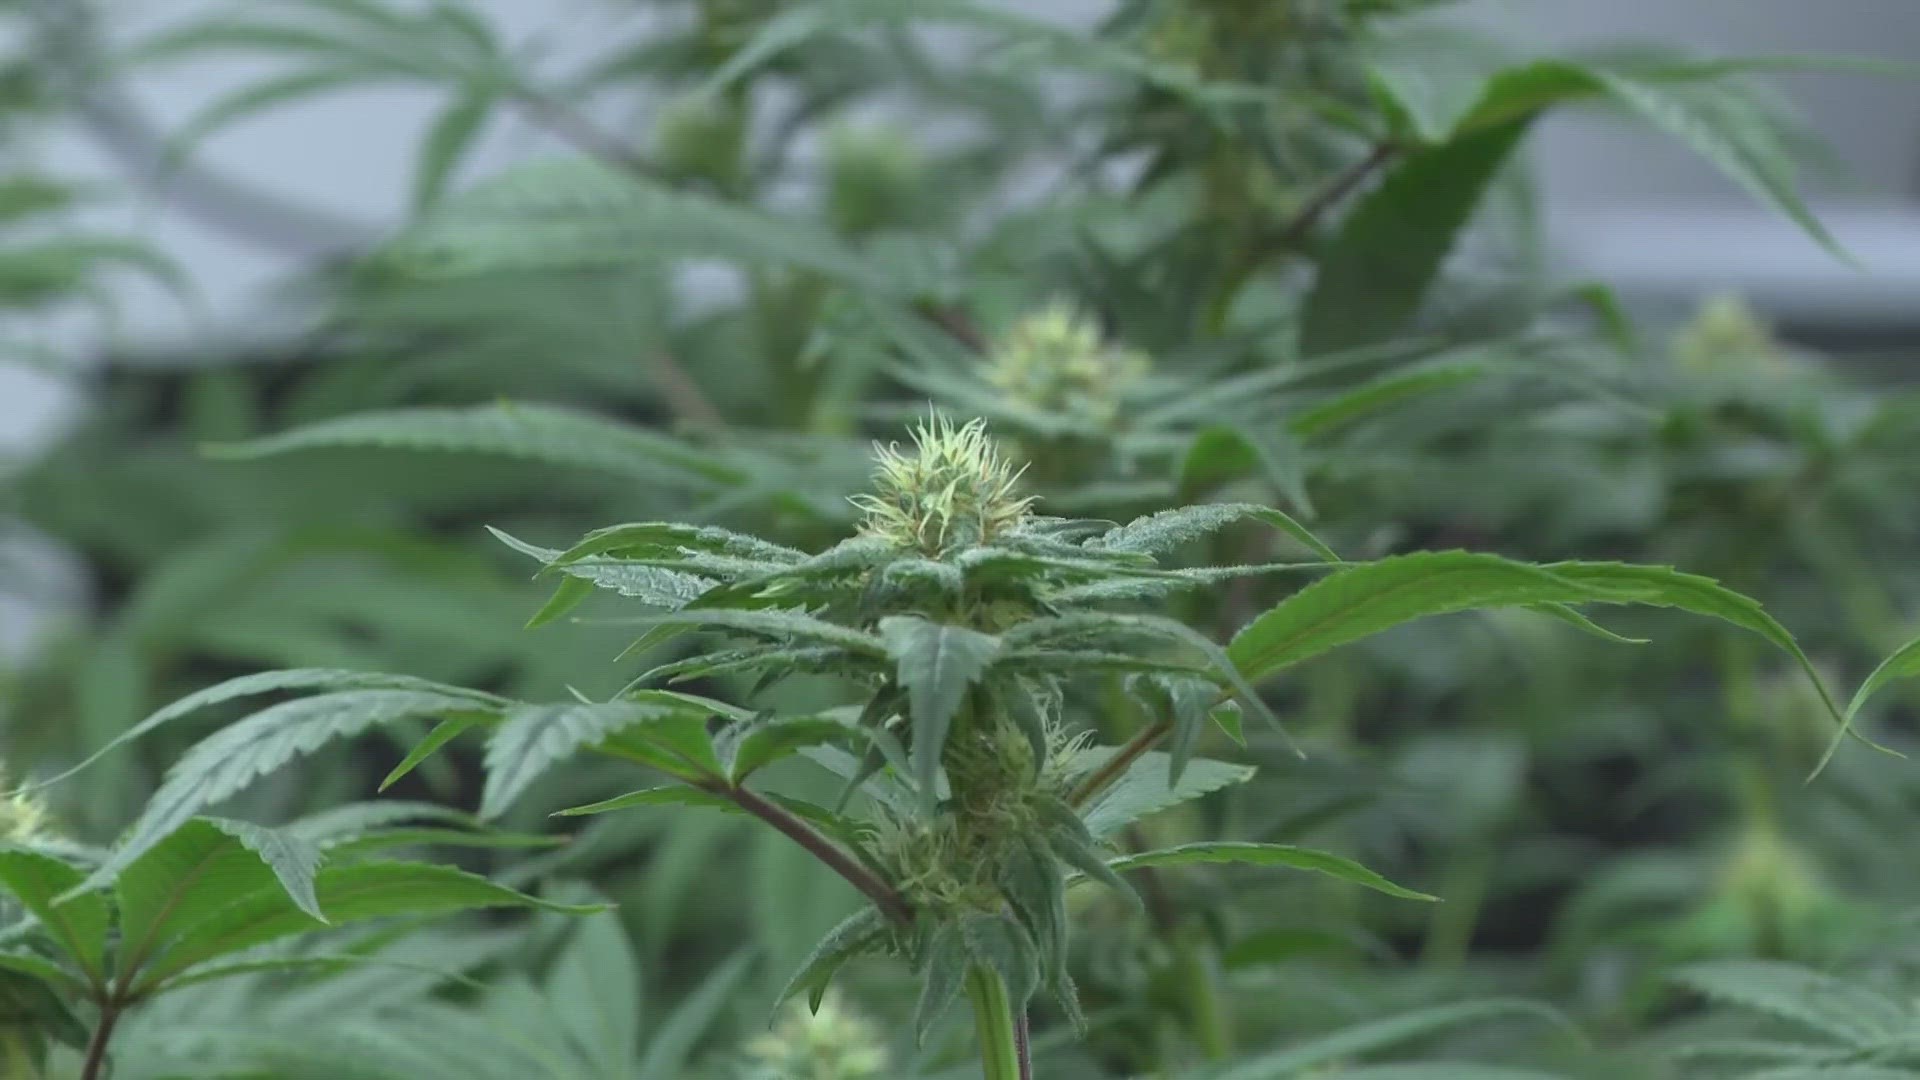 3News' Kierra Cotton is there for a closer look at what the Cleveland School of Cannabis has to offer.